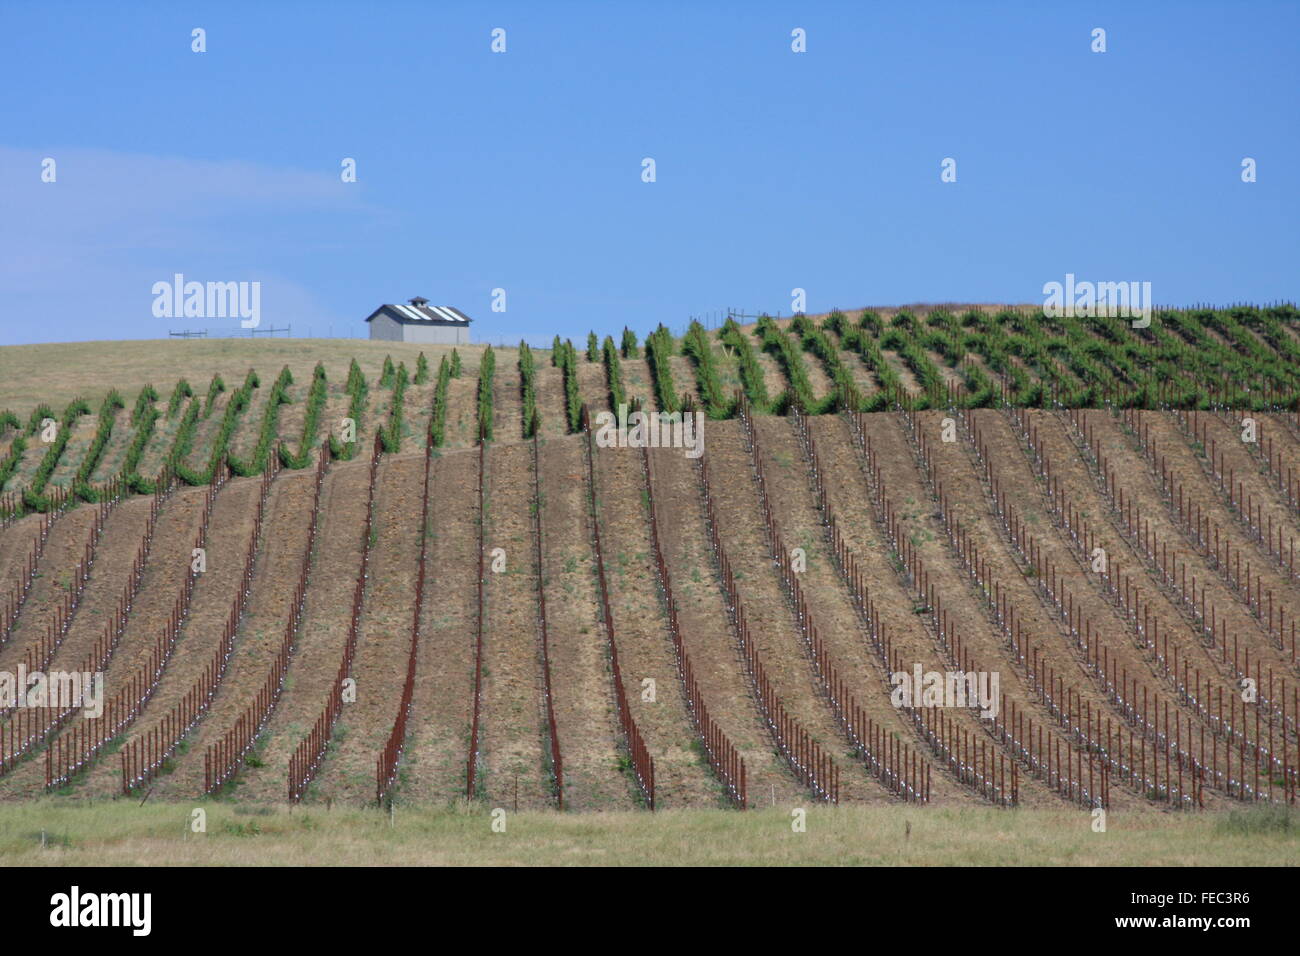 Vineyards in northern California on the road leading to Bodega Bay Stock Photo